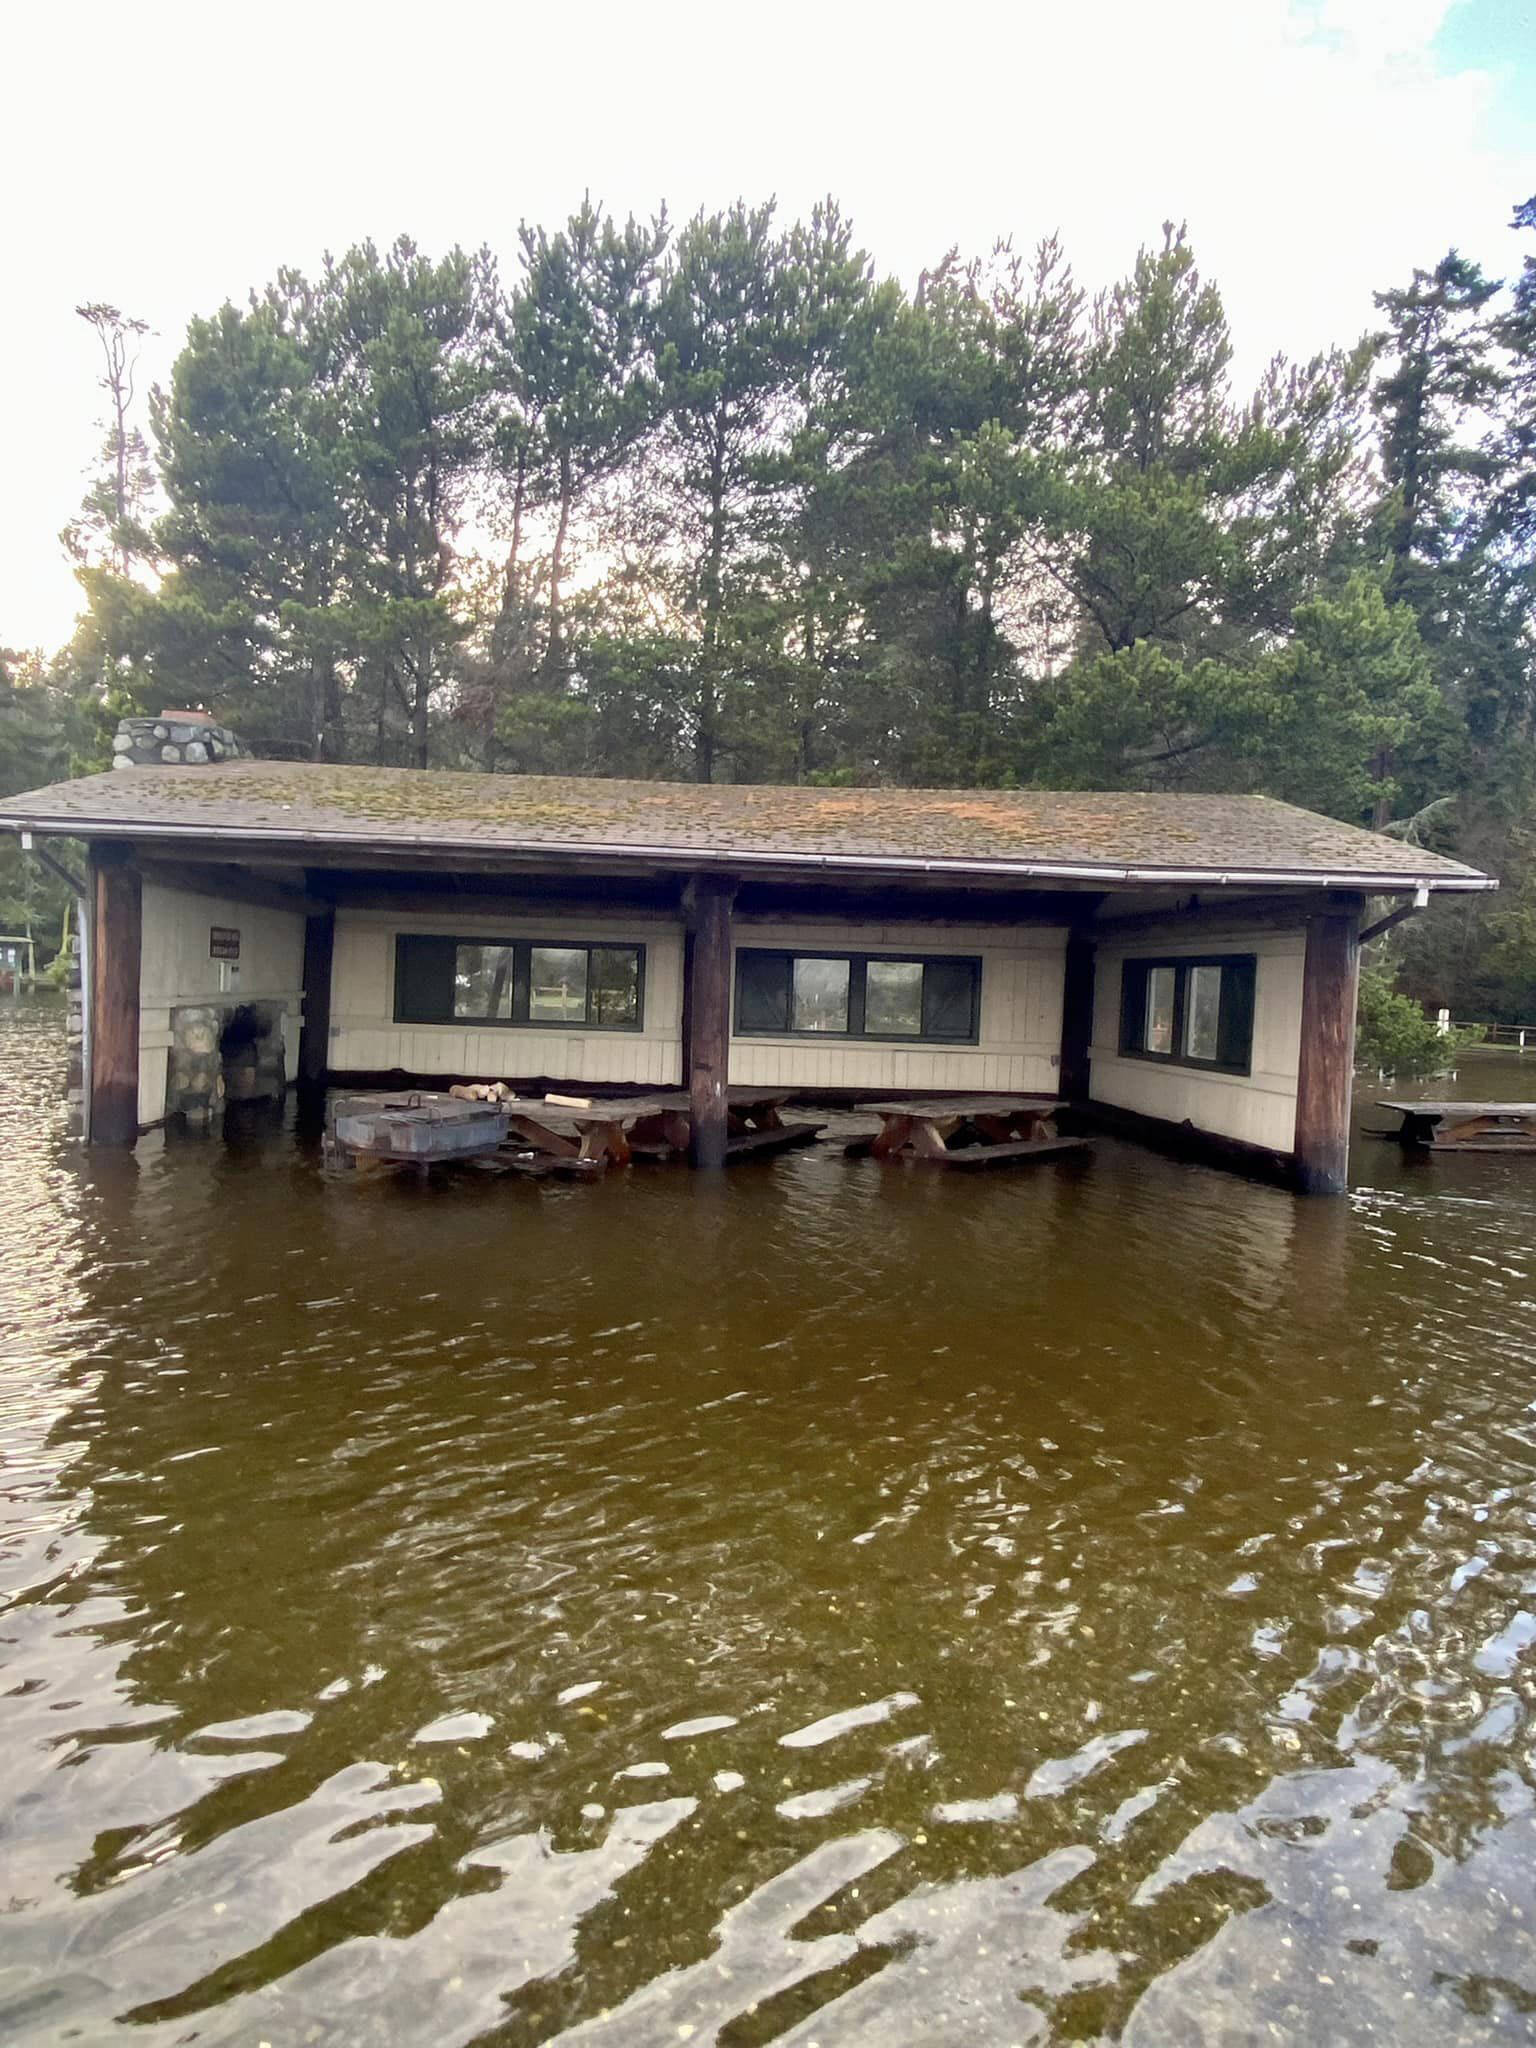 The picnic shelter at Fay Bainbridge Park is flooded by the King Tides Dec. 27.